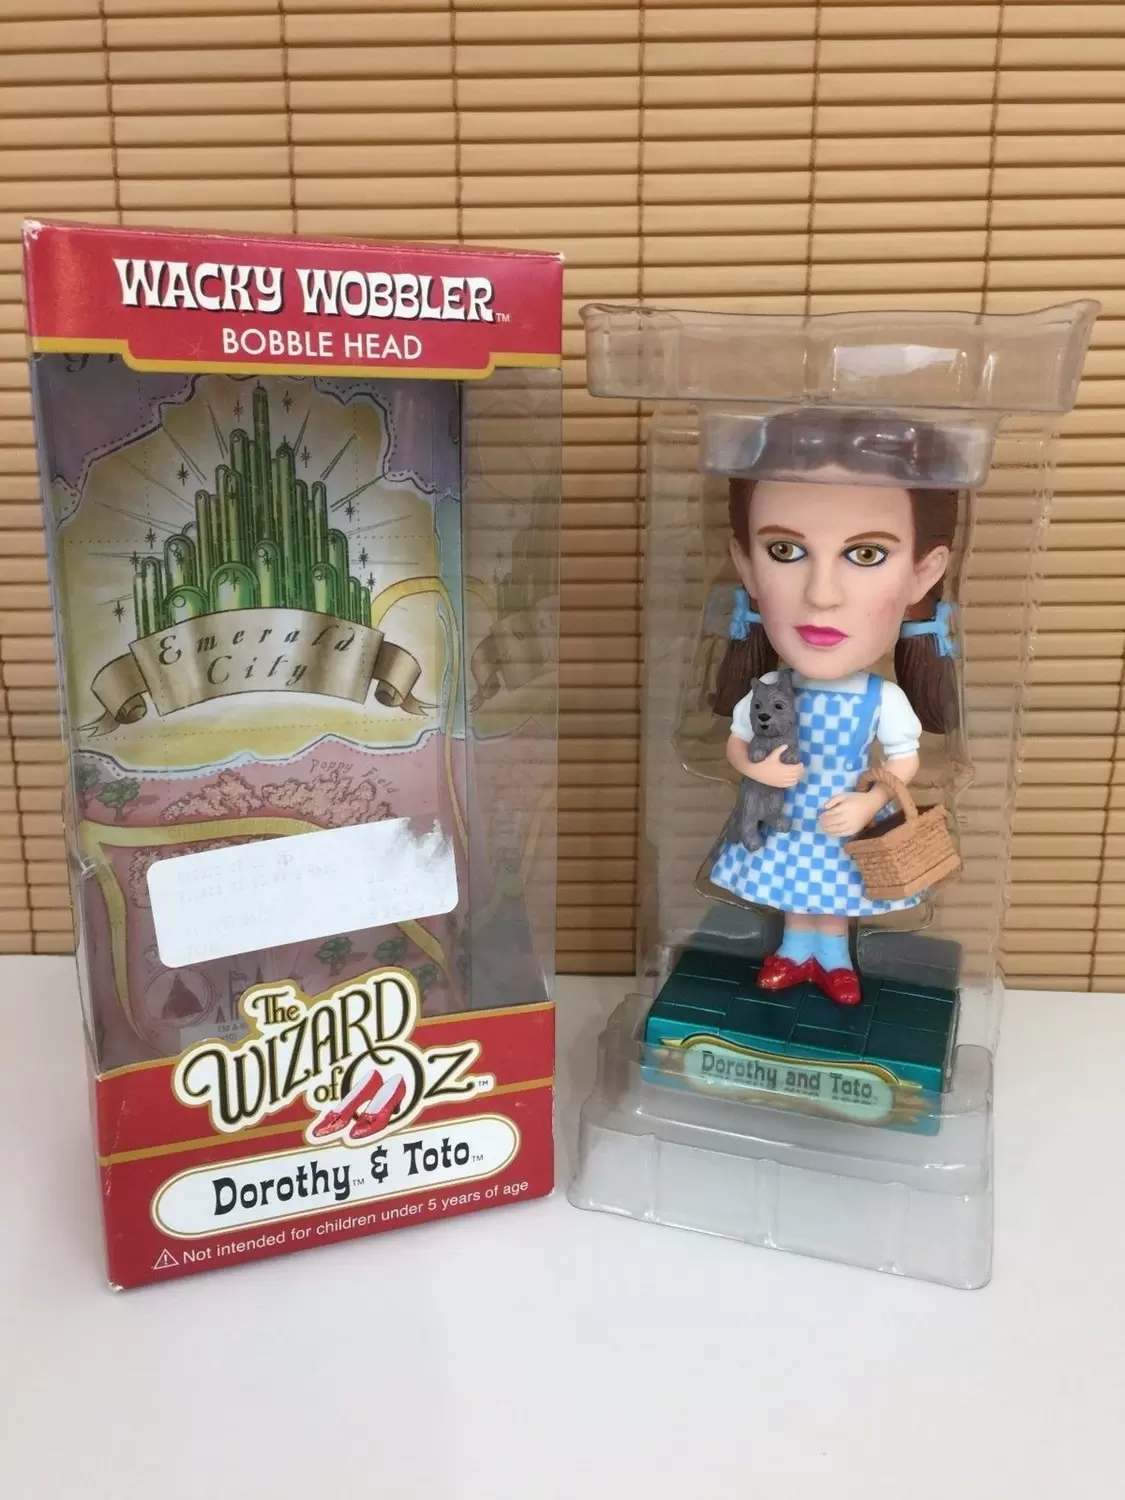 Wacky Wobbler Movies - The Wizard of Oz - Dorothy & Toto Chase